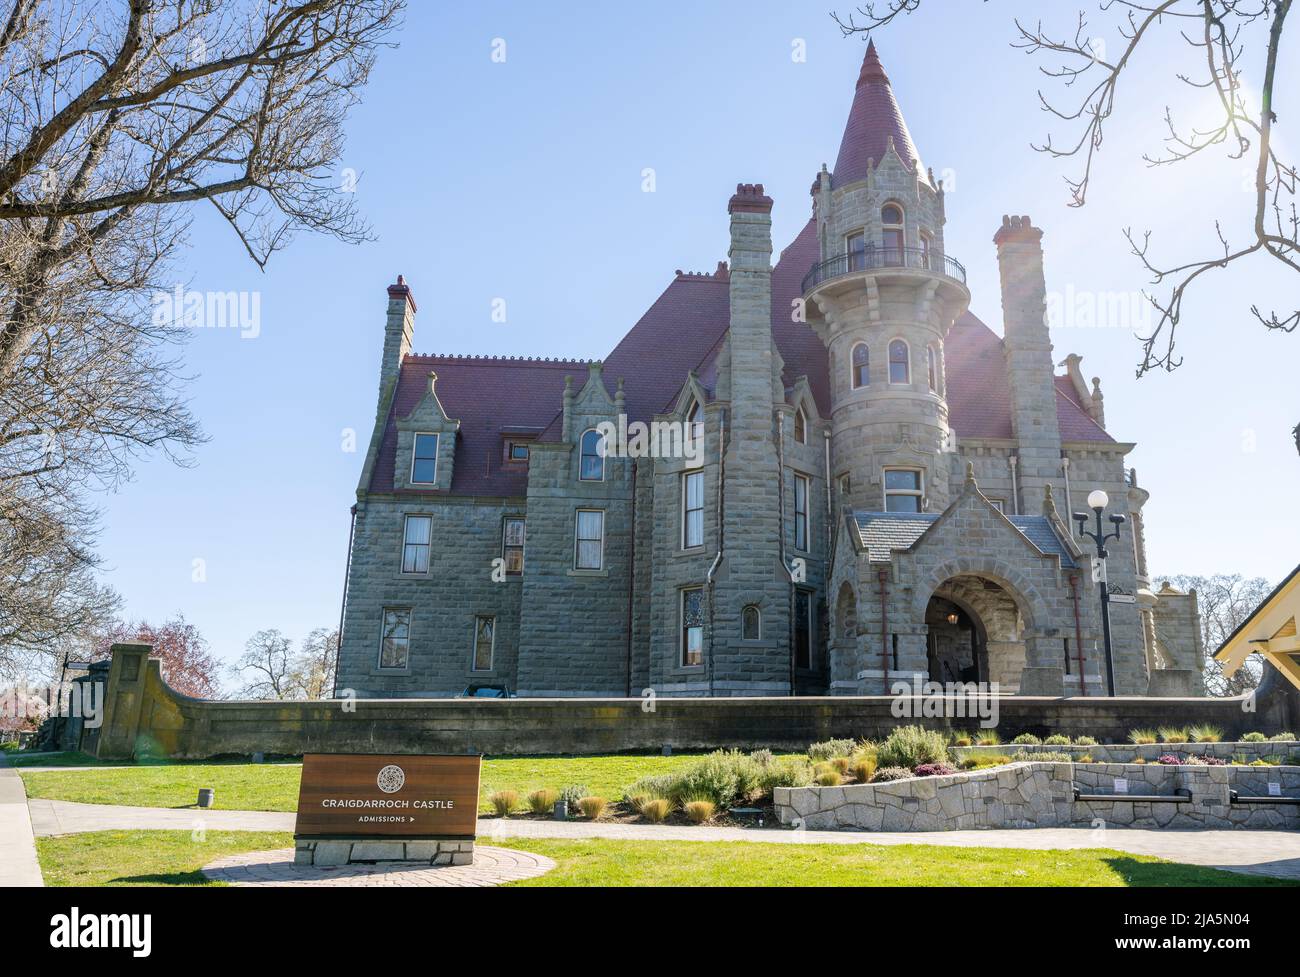 Victoria, BC, Canada - April 14 2021 : Craigdarroch Castle front view. Craigdarroch National Historic Site of Canada. Stock Photo